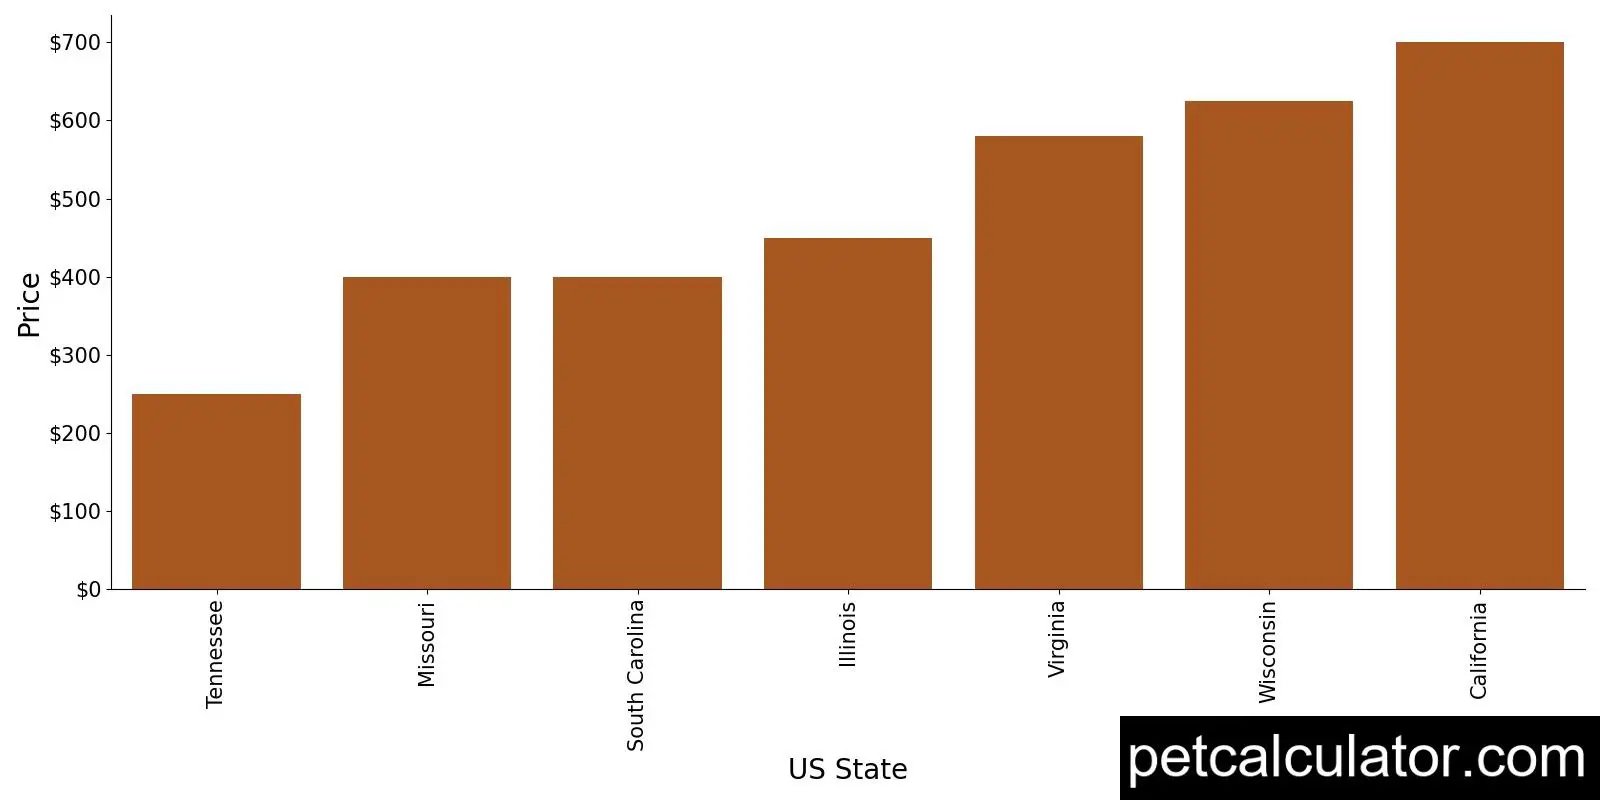 Price of American English Coonhound by US State 